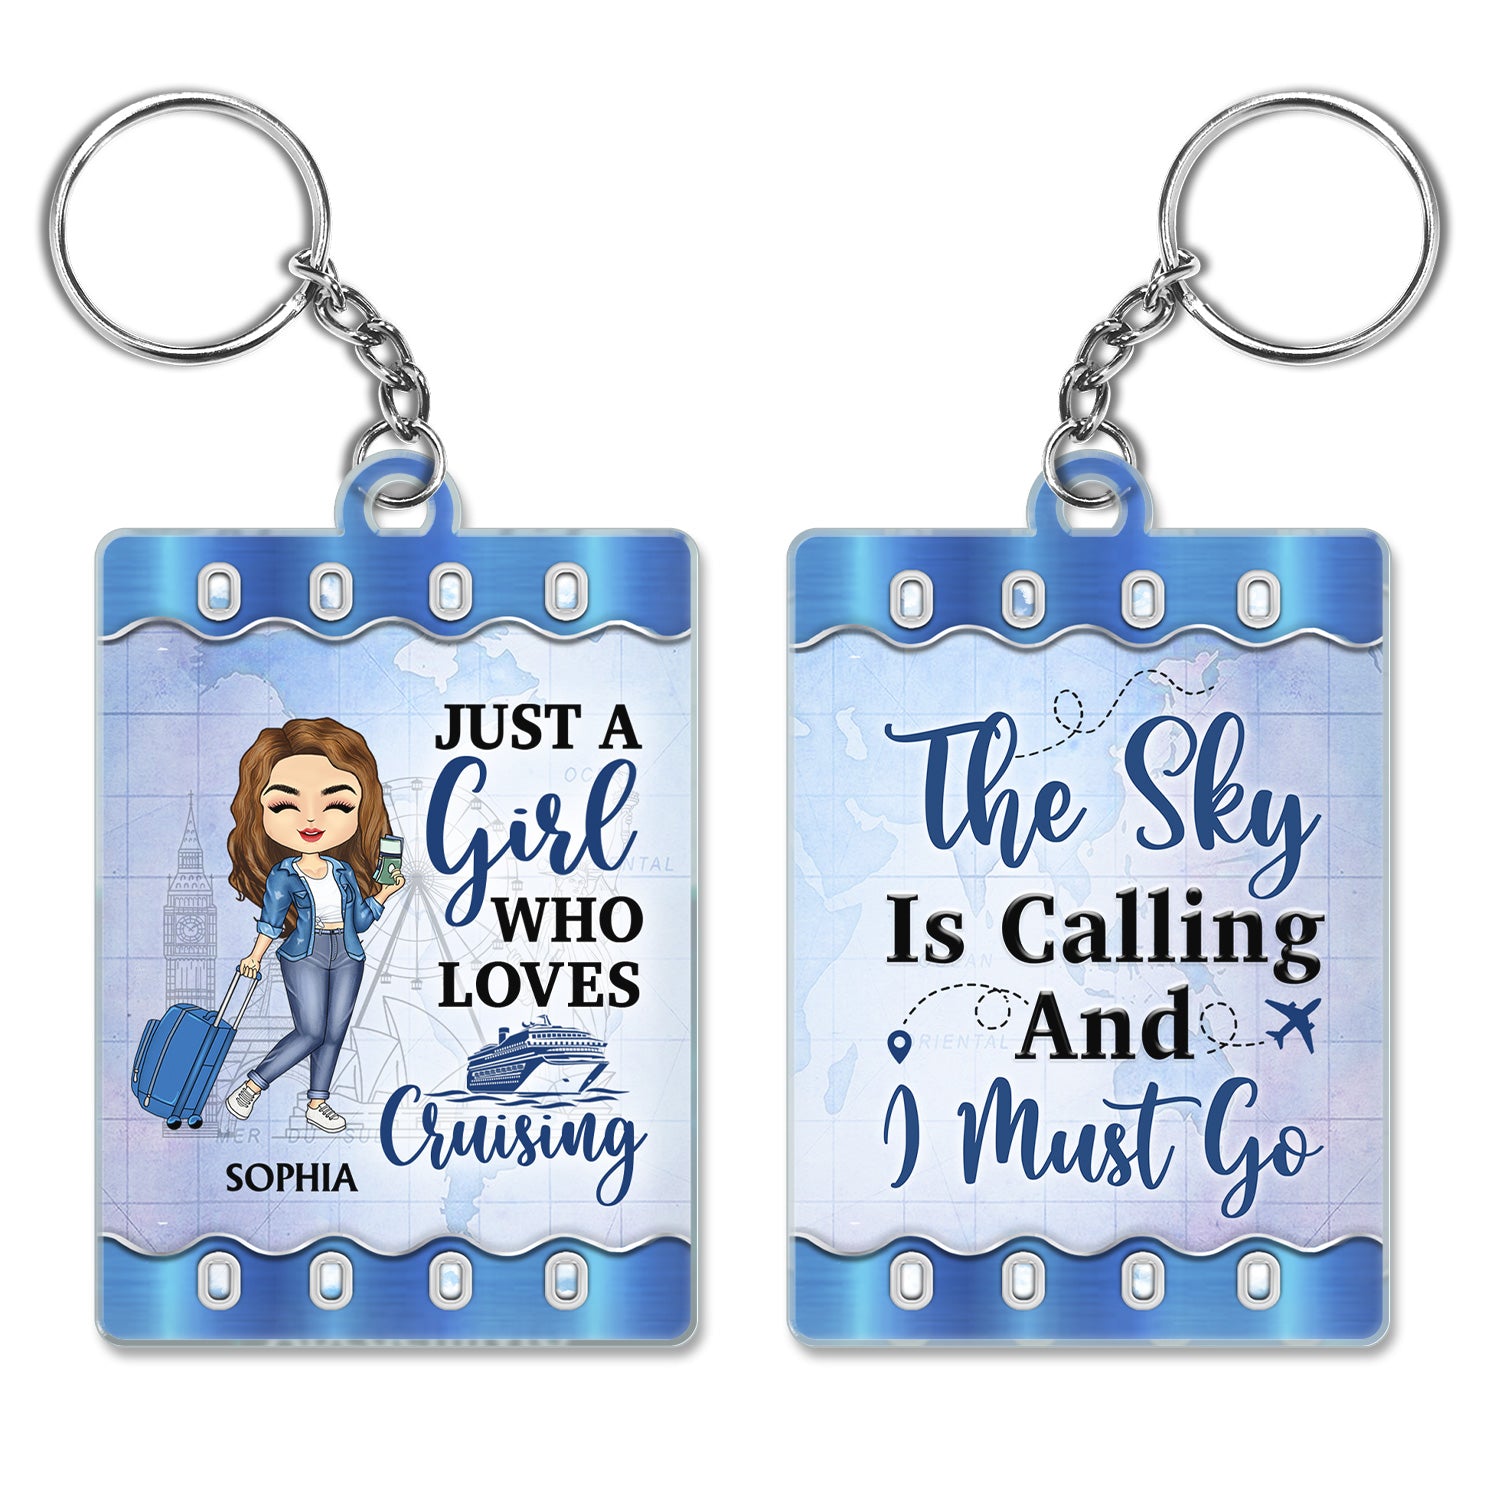 Just A Girl Boy Who Loves Traveling Cruising - Birthday Gift For Travel Lovers - Personalized Custom Acrylic Keychain